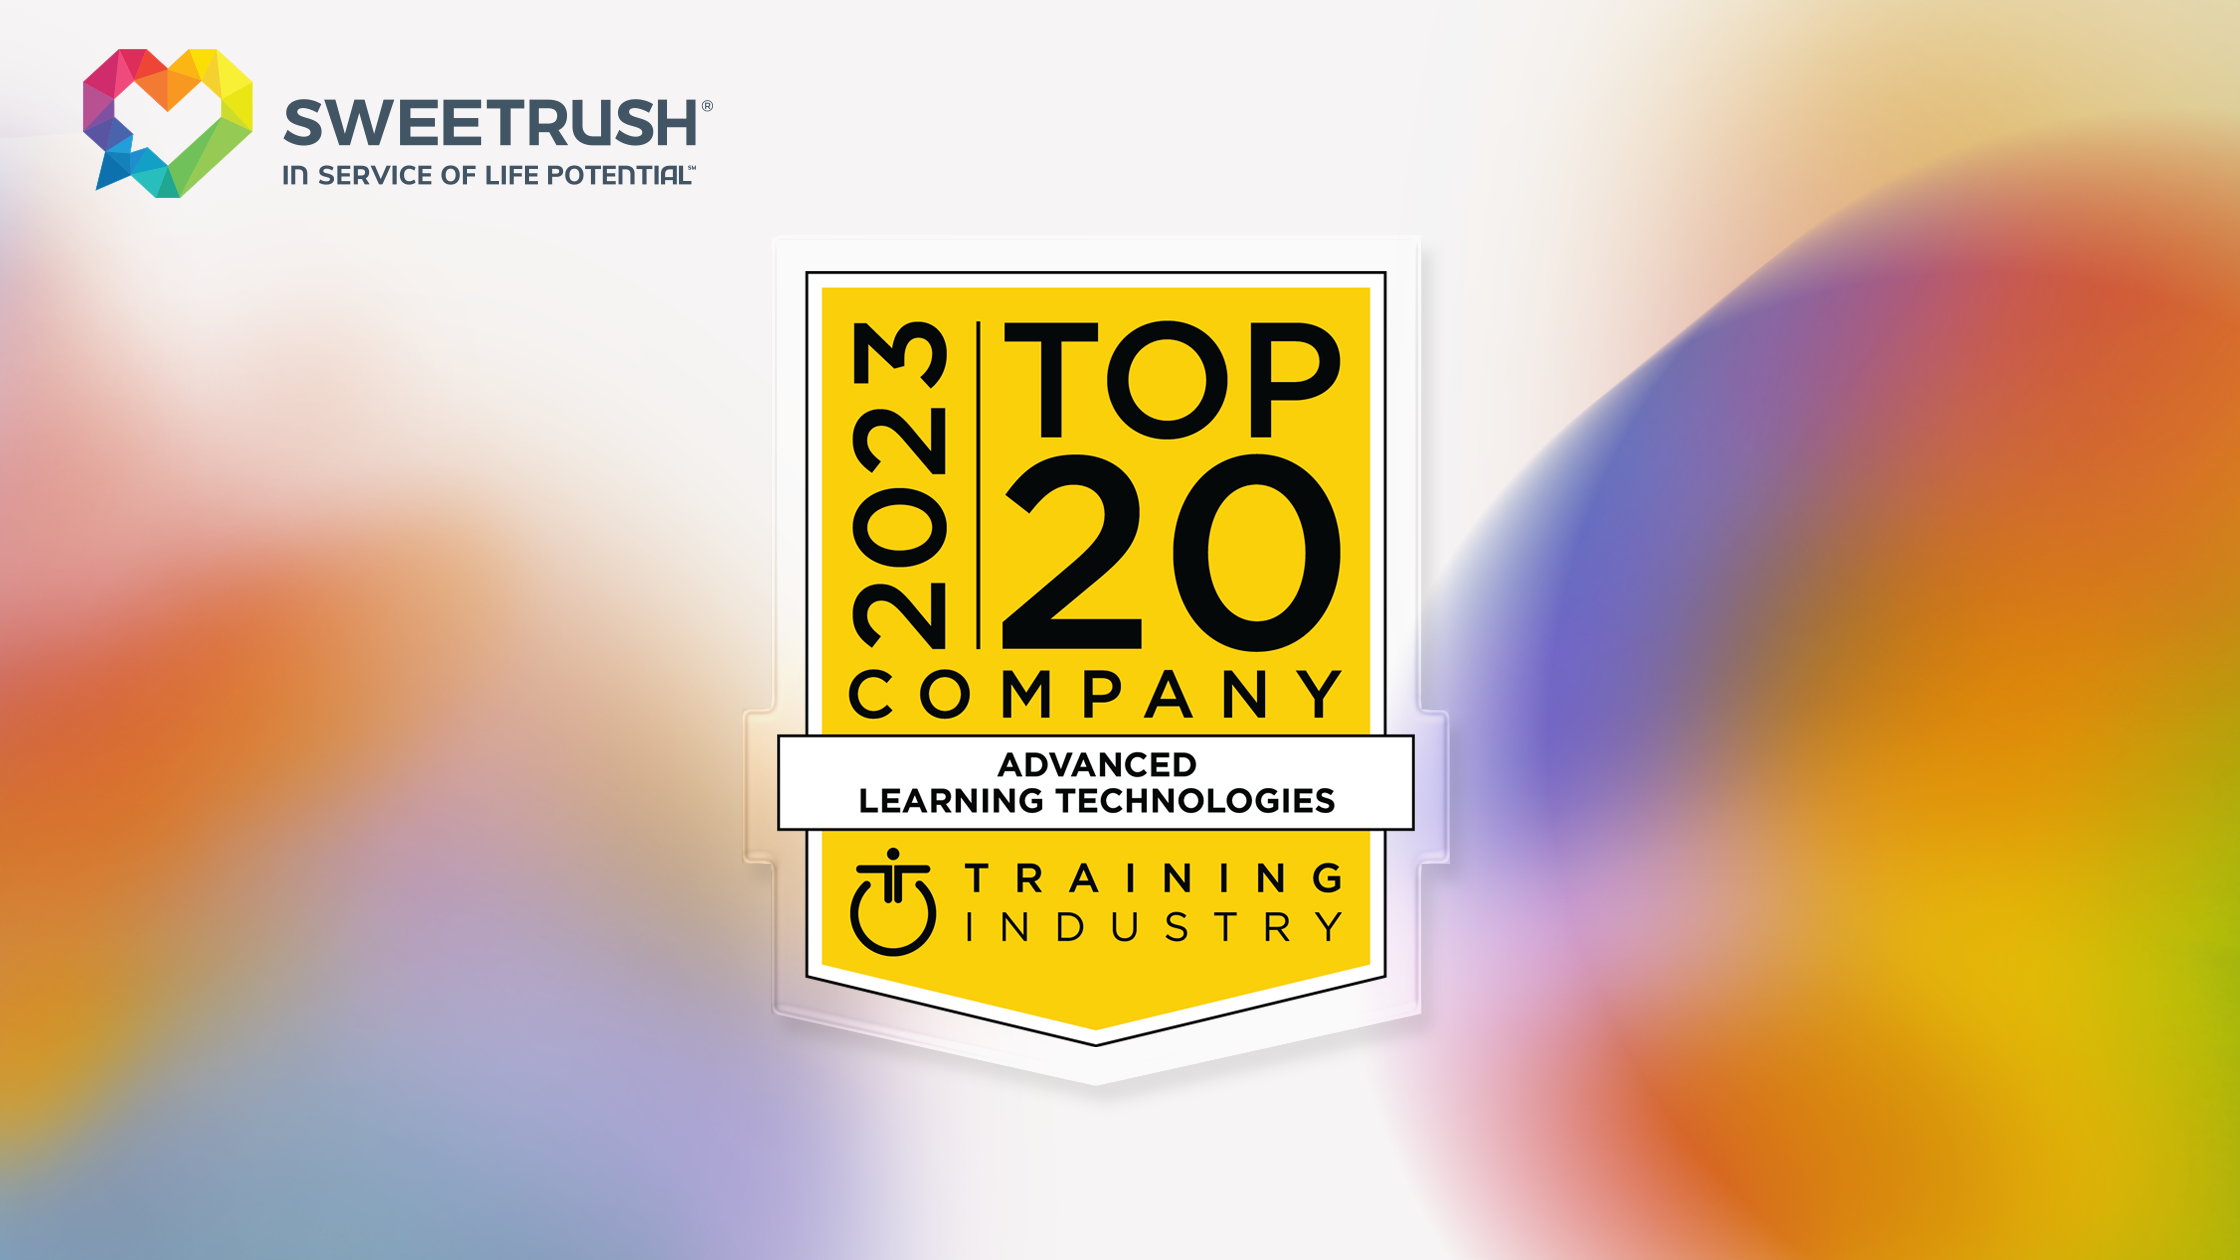 SweetRush Named Top Advanced Learning Technologies Company